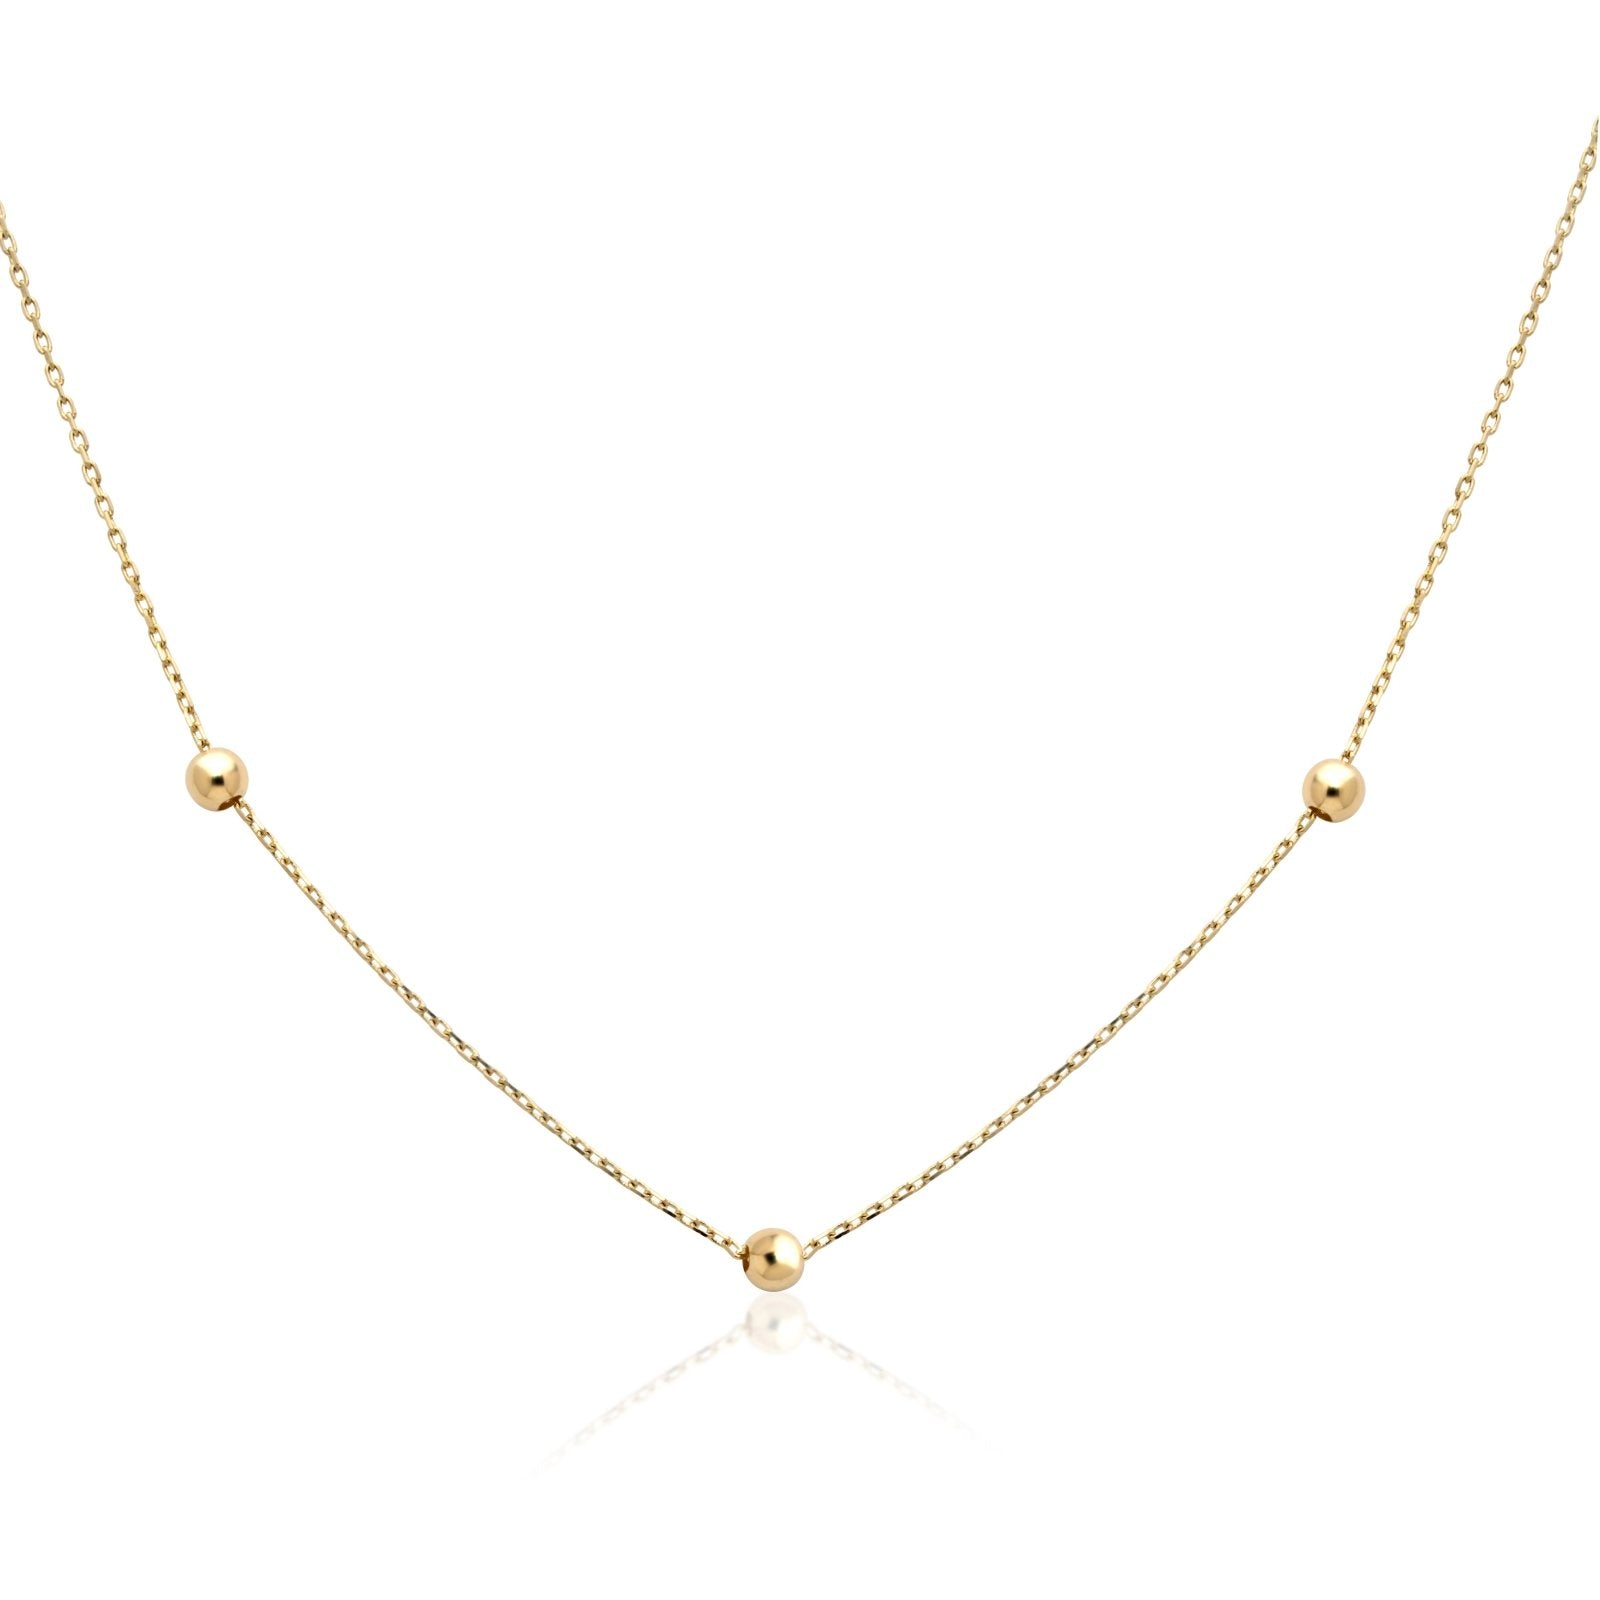 Beaded Station Necklace in Solid 10k Yellow Gold Necklaces Estella Collection #product_description# 14k Layering Necklace Make Collection #tag4# #tag5# #tag6# #tag7# #tag8# #tag9# #tag10#